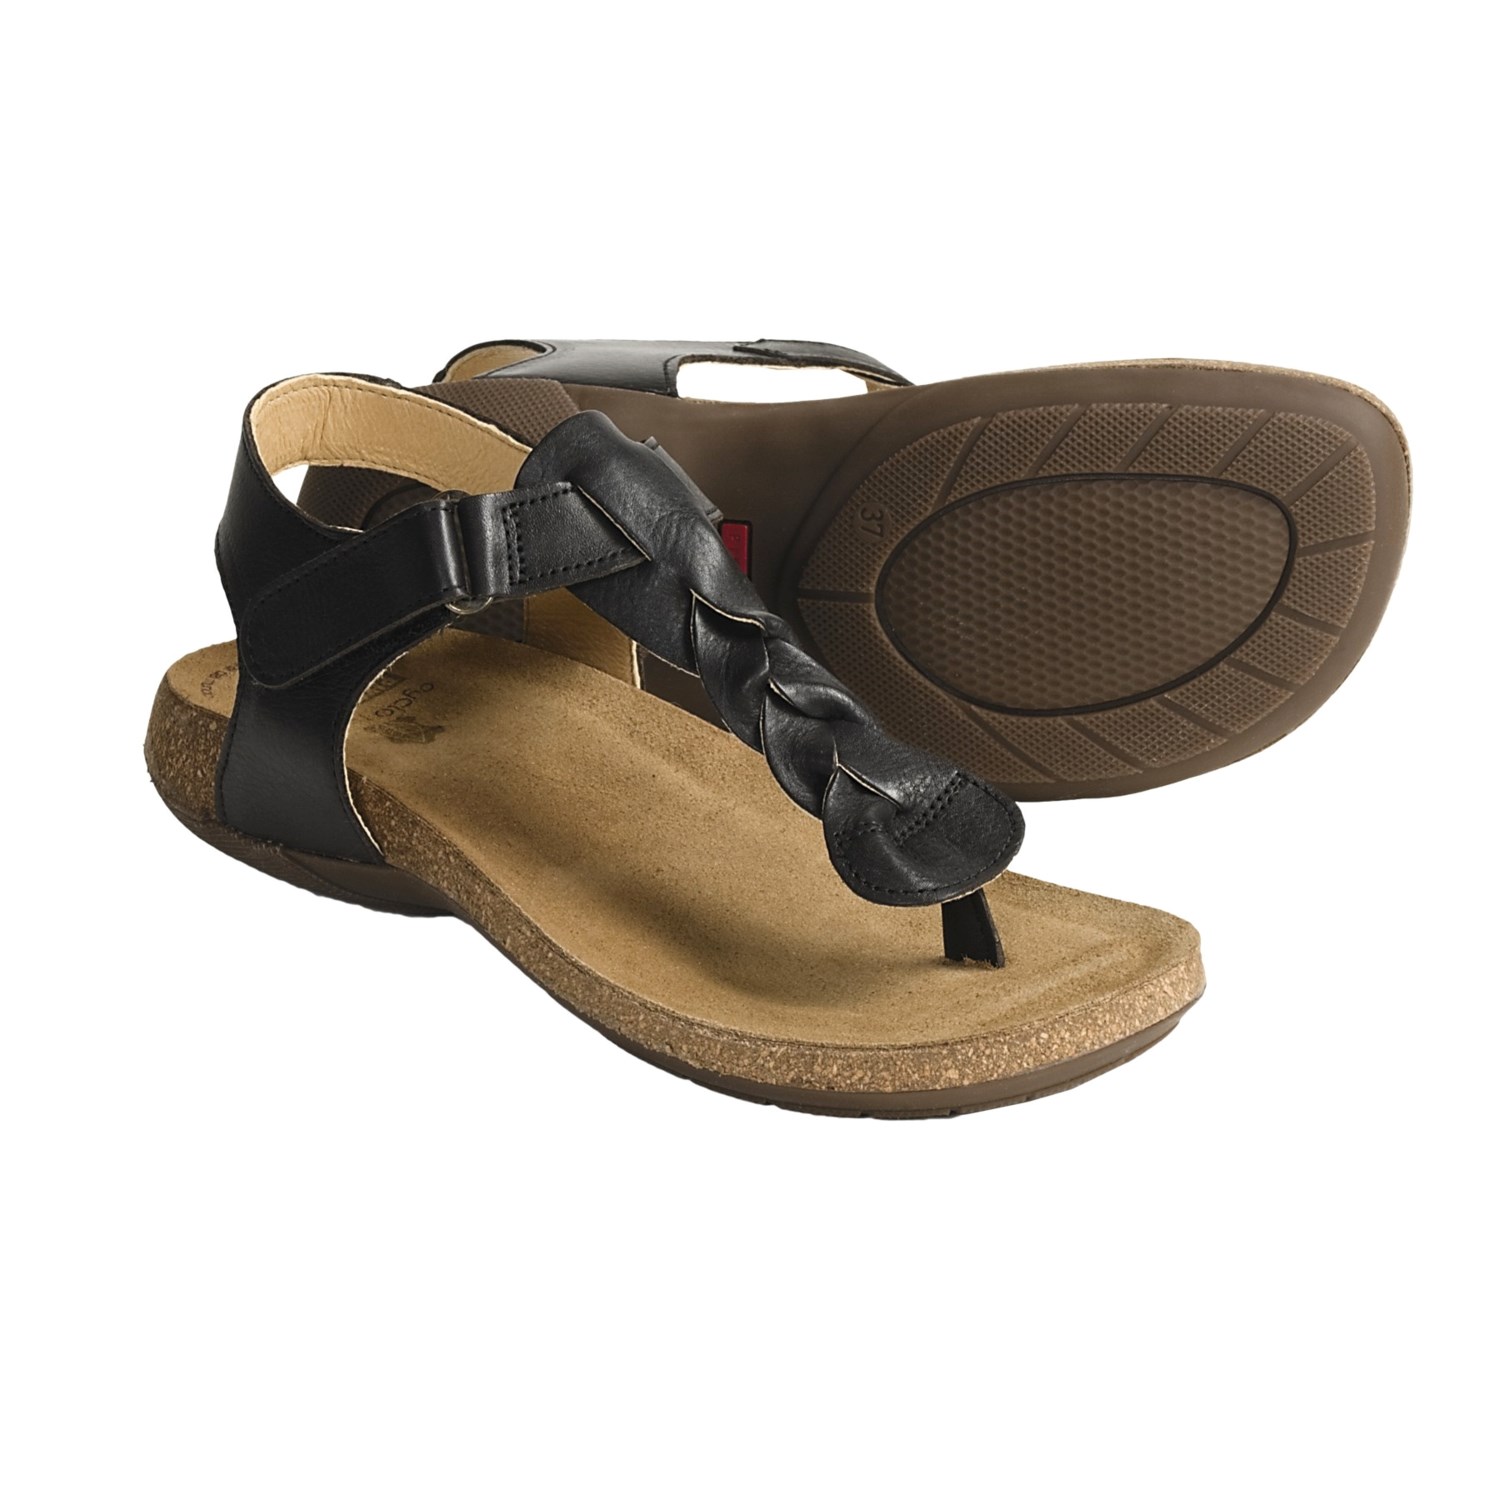 Pikolinos Campello Leather Sandals (For Women) - Save 40%